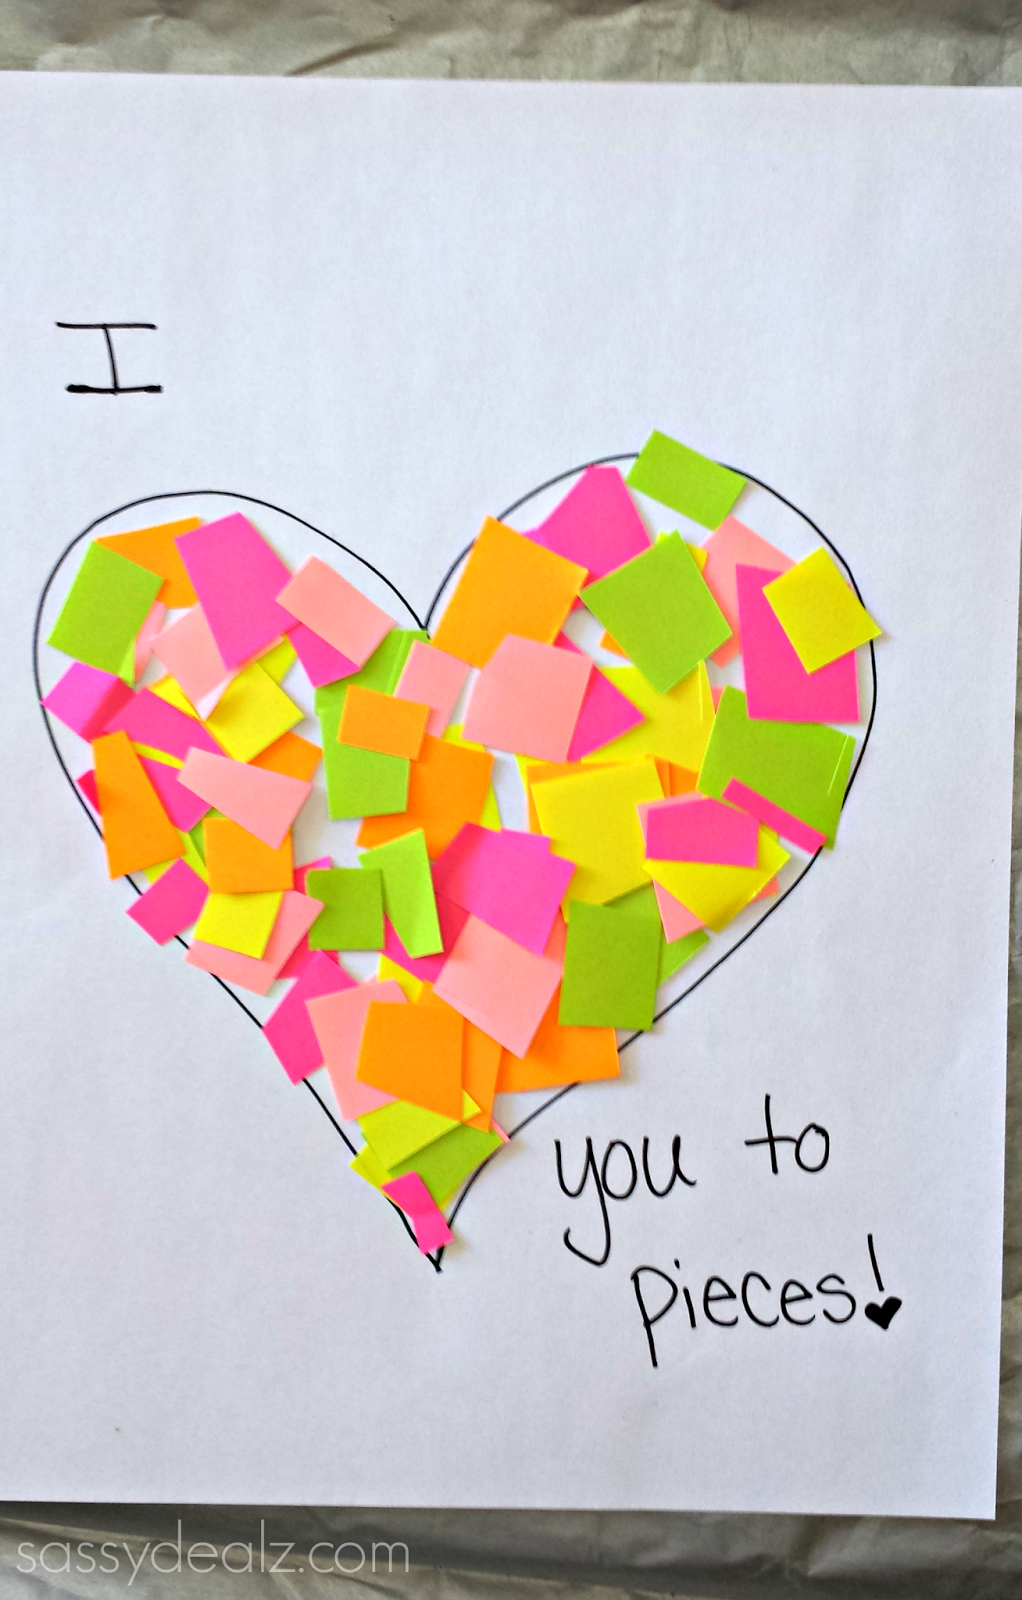 i-love-you-to-pieces-heart-craft-for-kids-valentine-card-idea